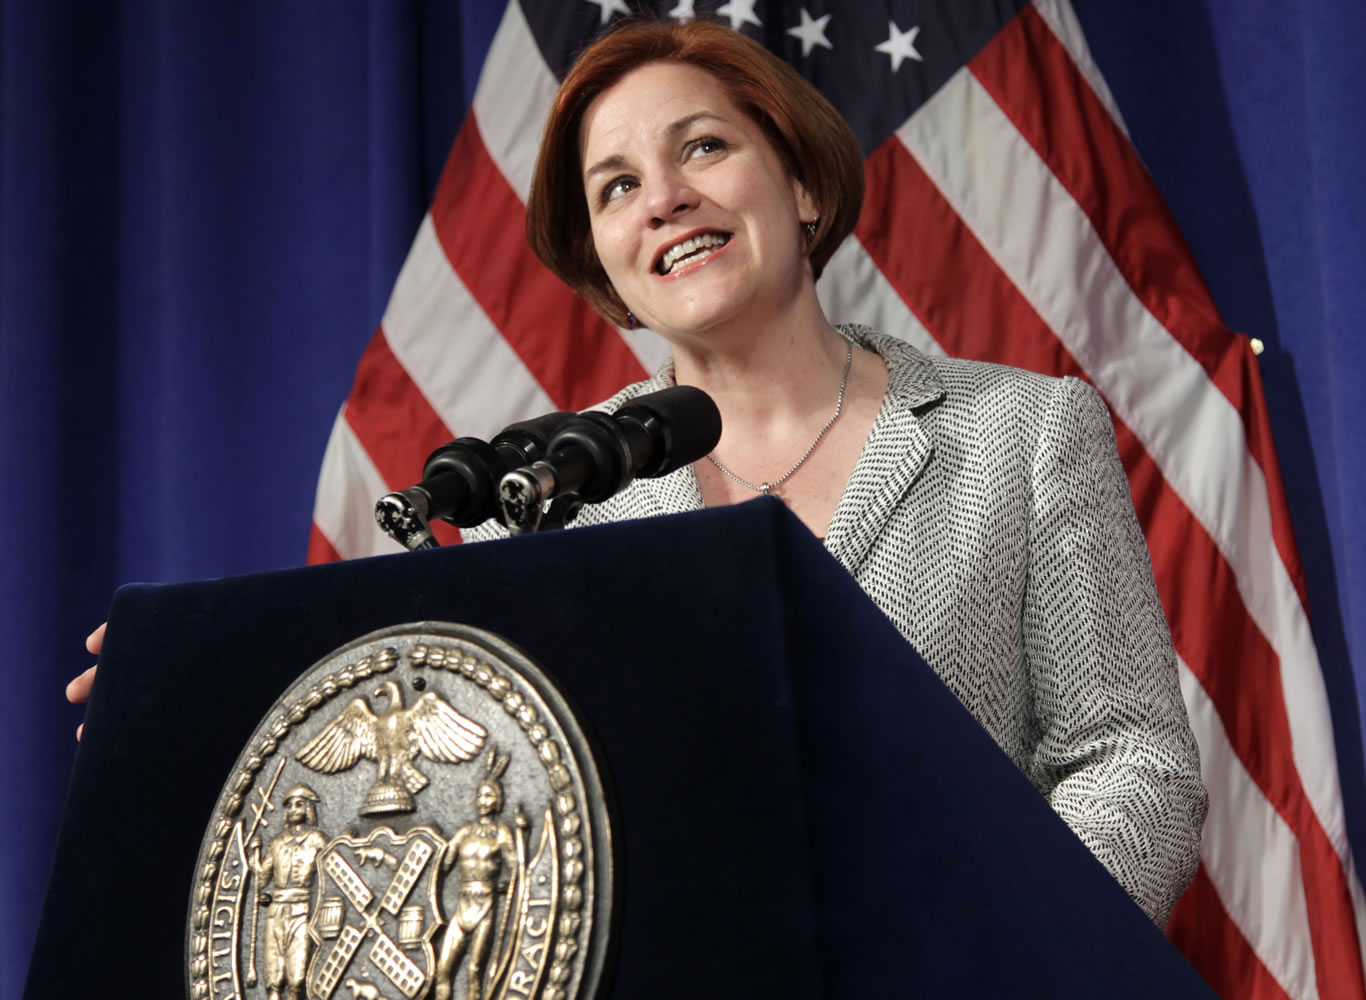 New York City Council Speaker Christine Quinn talks to reporters during a 2012 news conference at City Hall in New York.